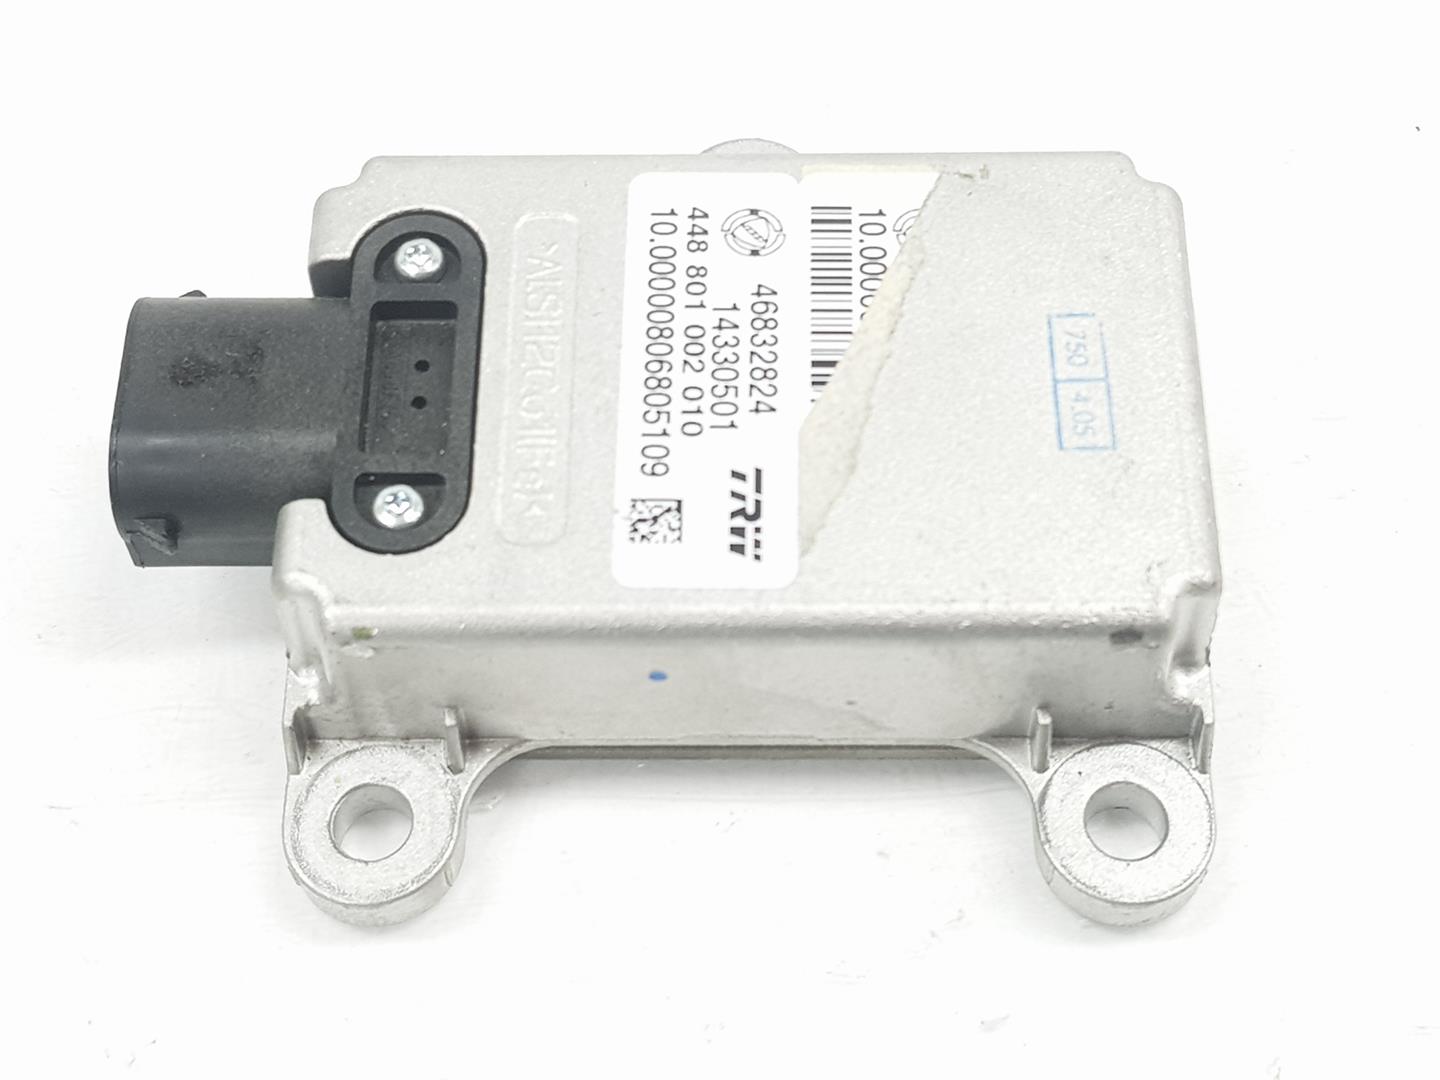 FIAT Croma 194 (2005-2011) Other Control Units 46832824, 46832824 21804401